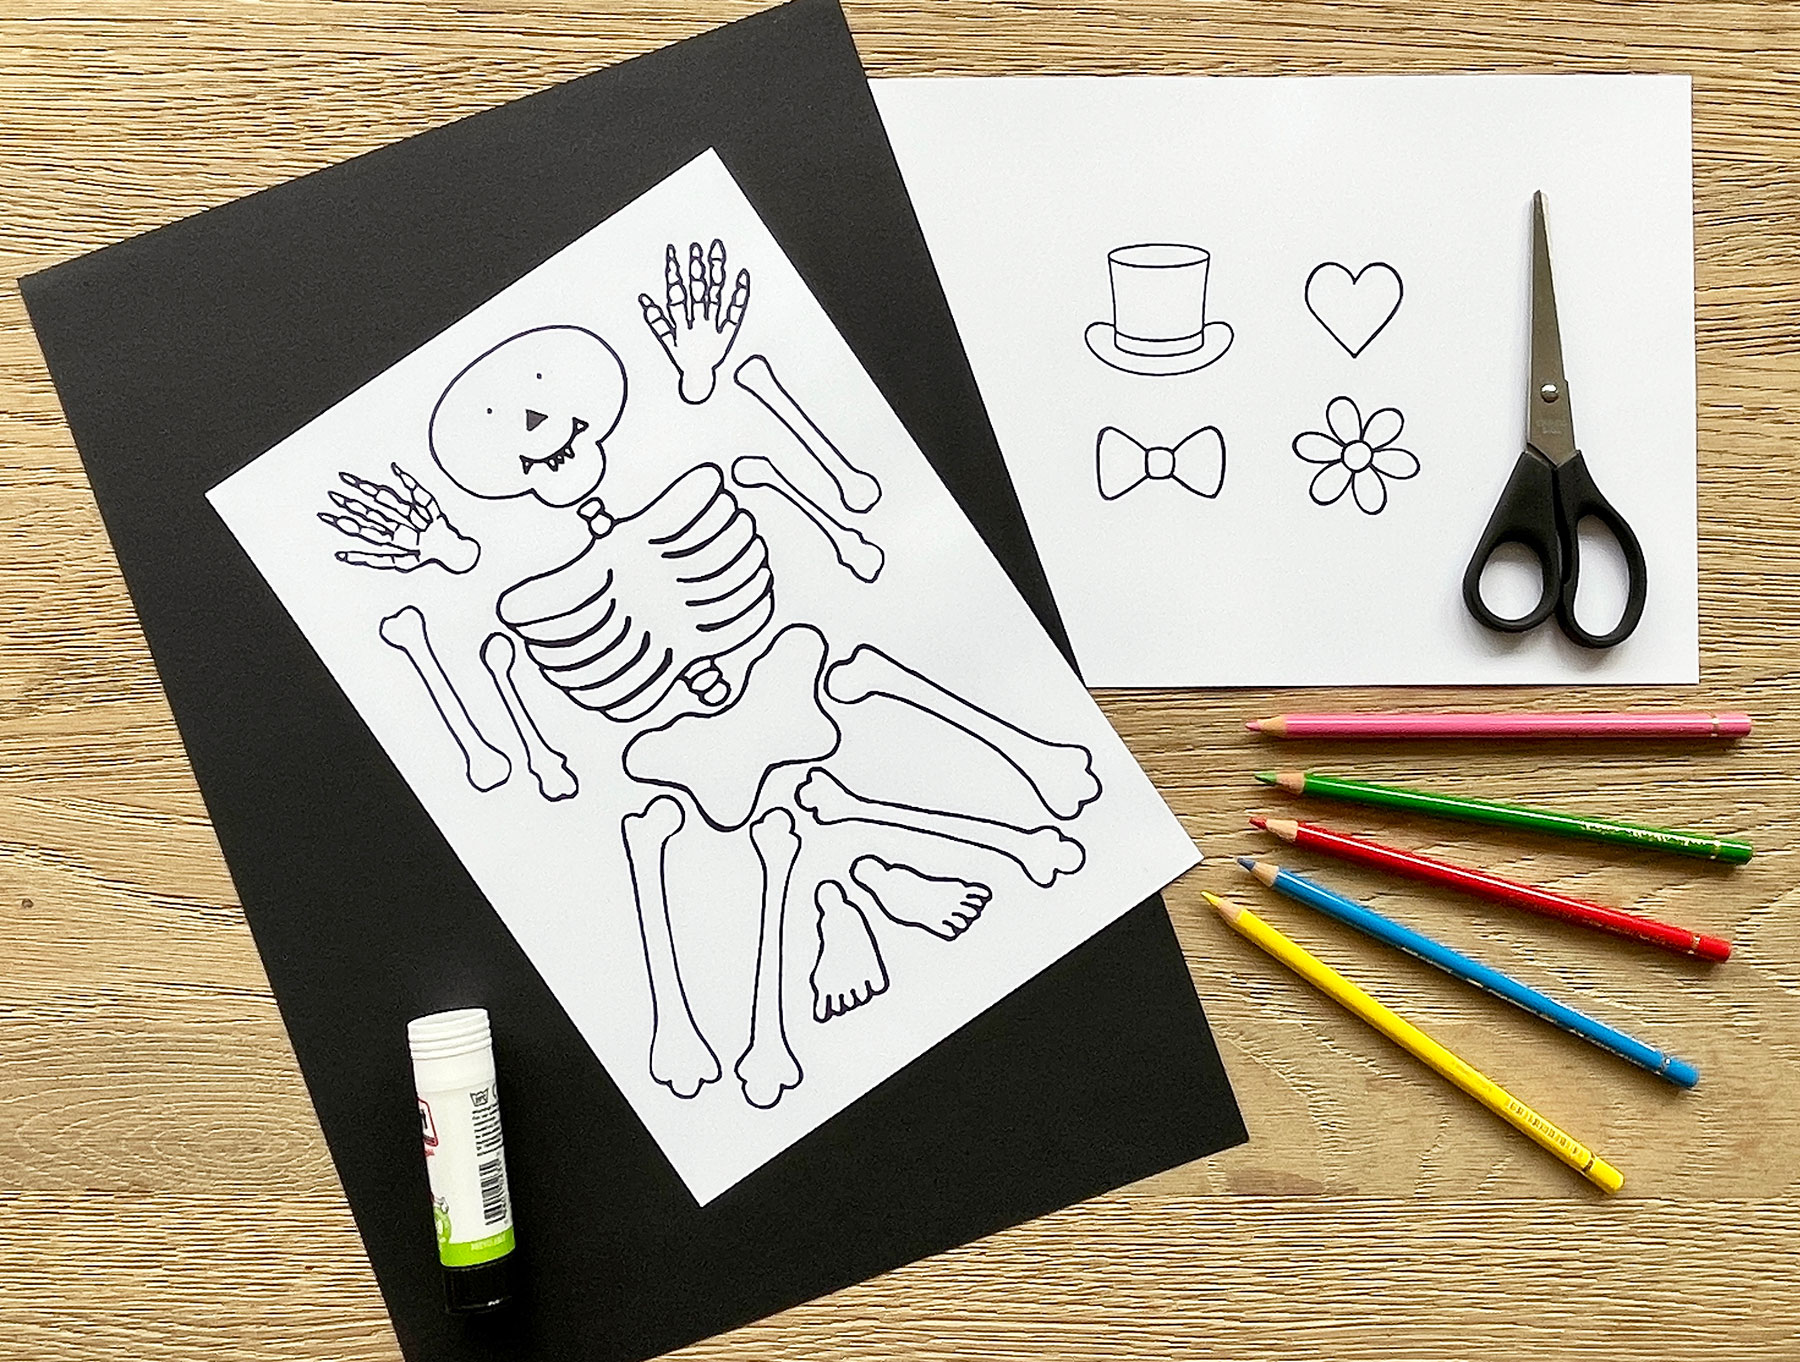 A photo of the materials needed for this craft including, black and white paper, cut out stencils of a Funnybones character and props, colouring pencils, scissors and glue